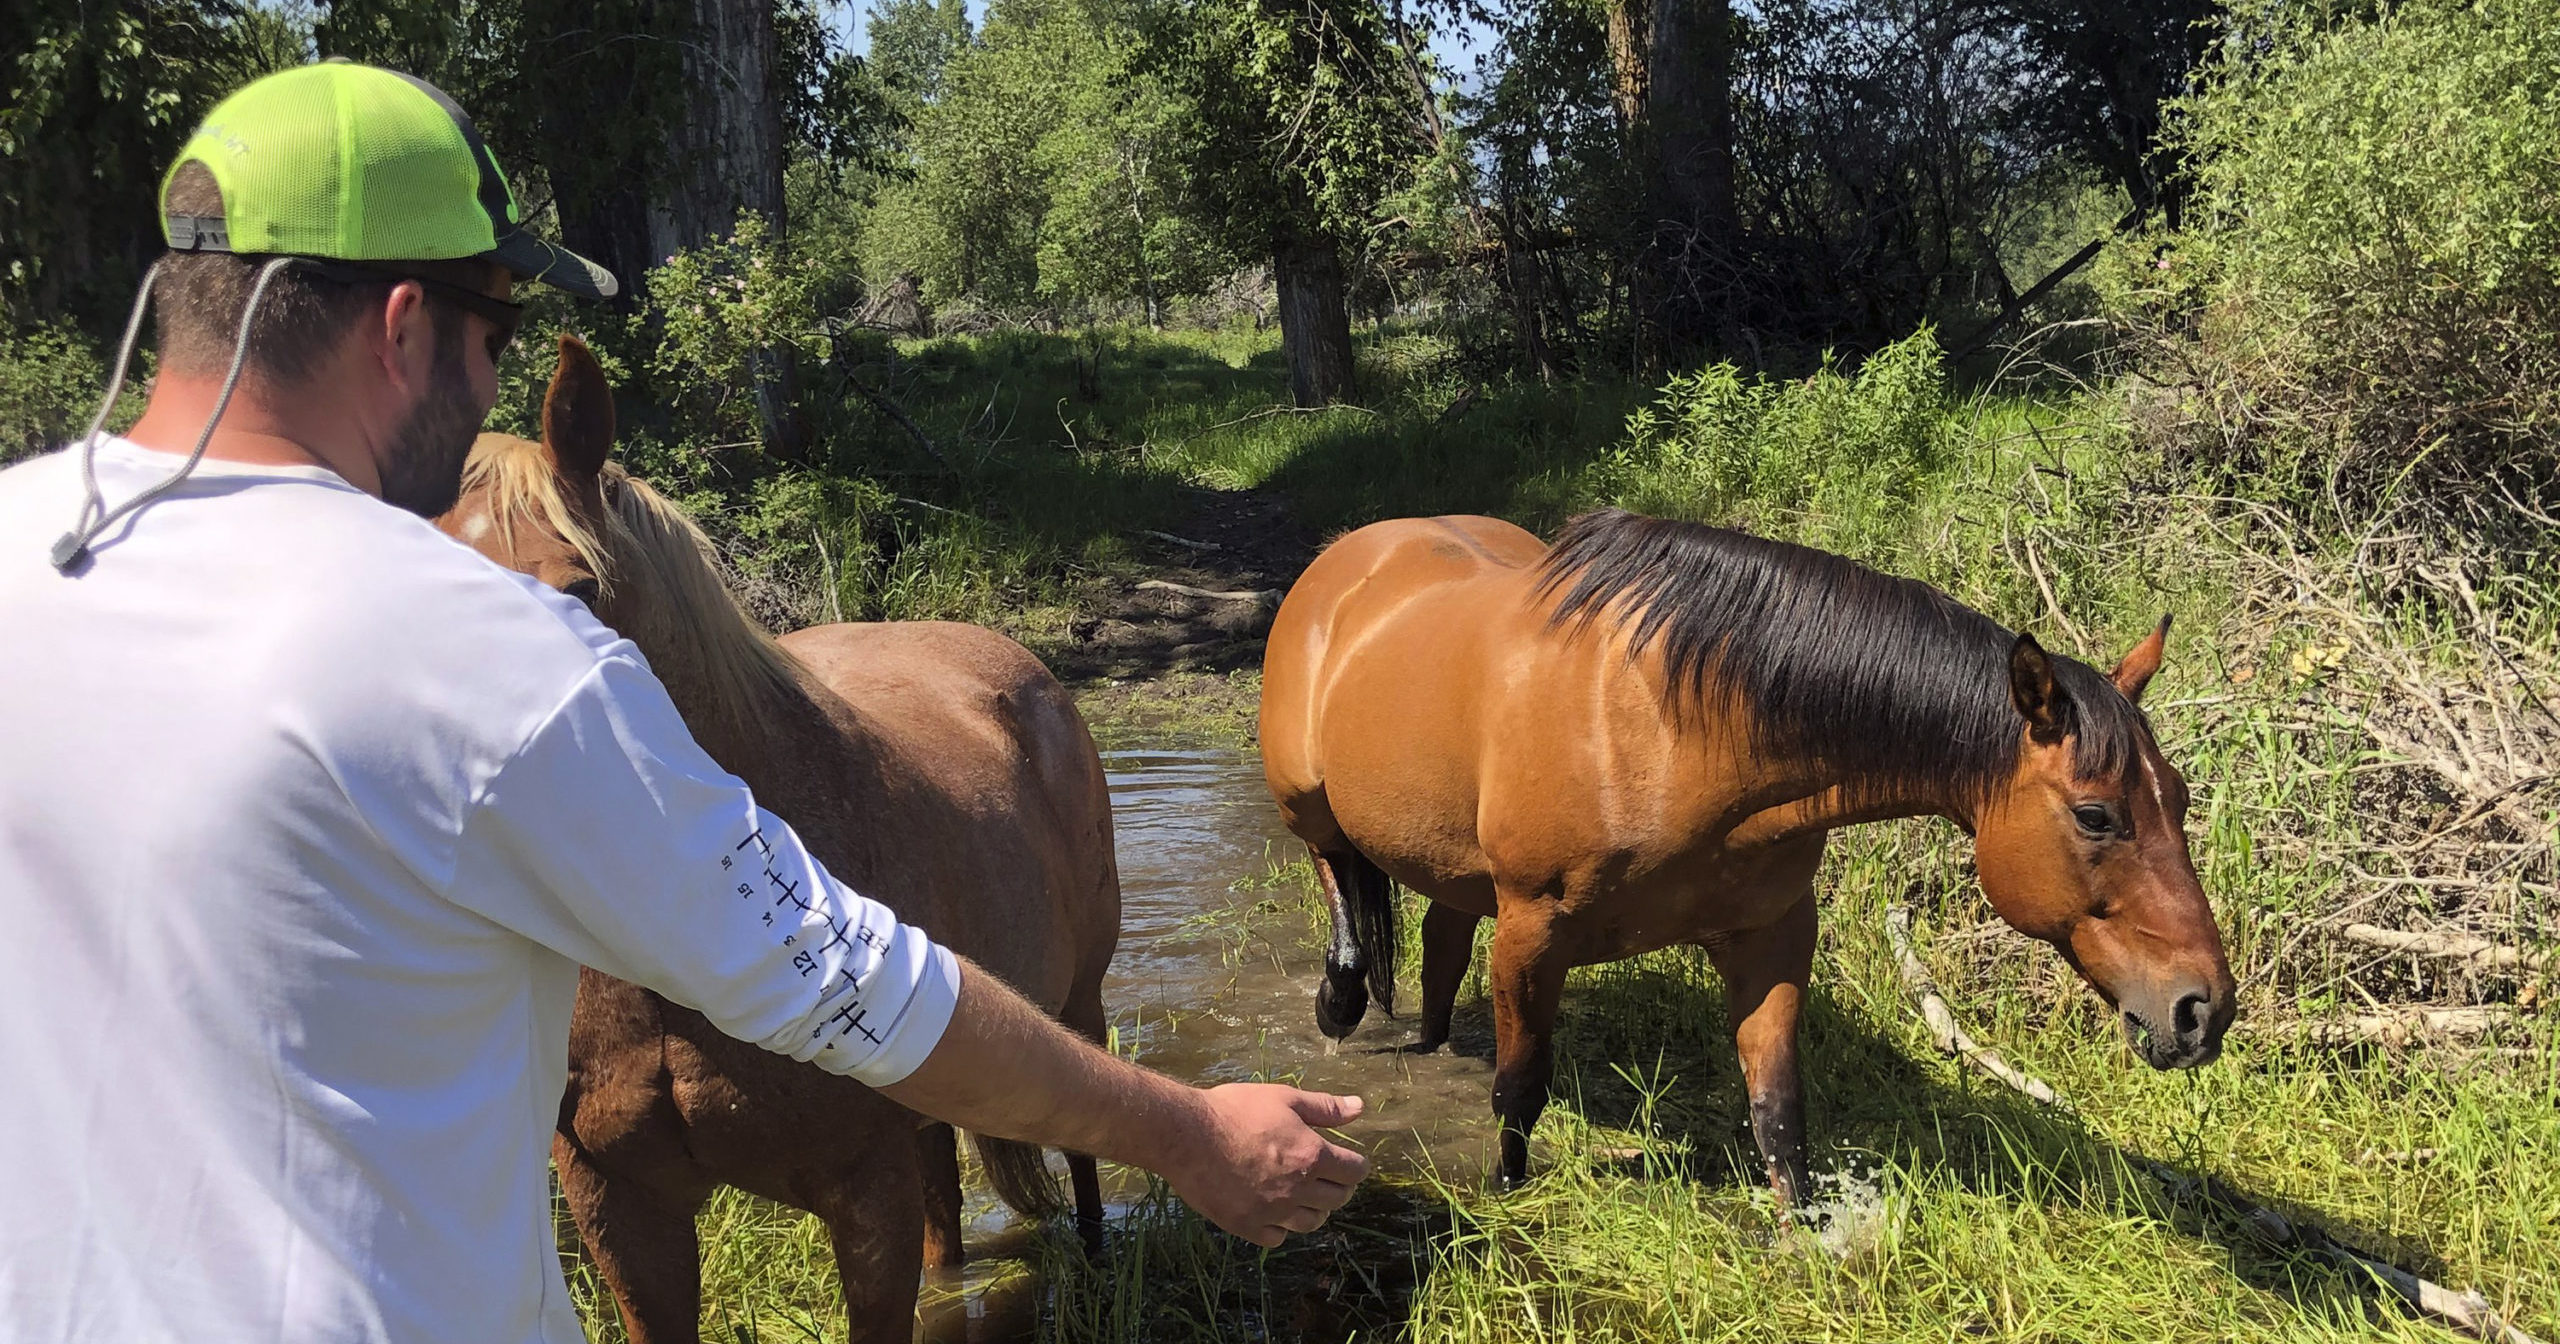 Matthew Eickholt of Hamilton, Montana, greets a horse on Tuesday, two days after he and his wife rescued the horse from drowning in the Bitterroot River north of Victor, Montana.